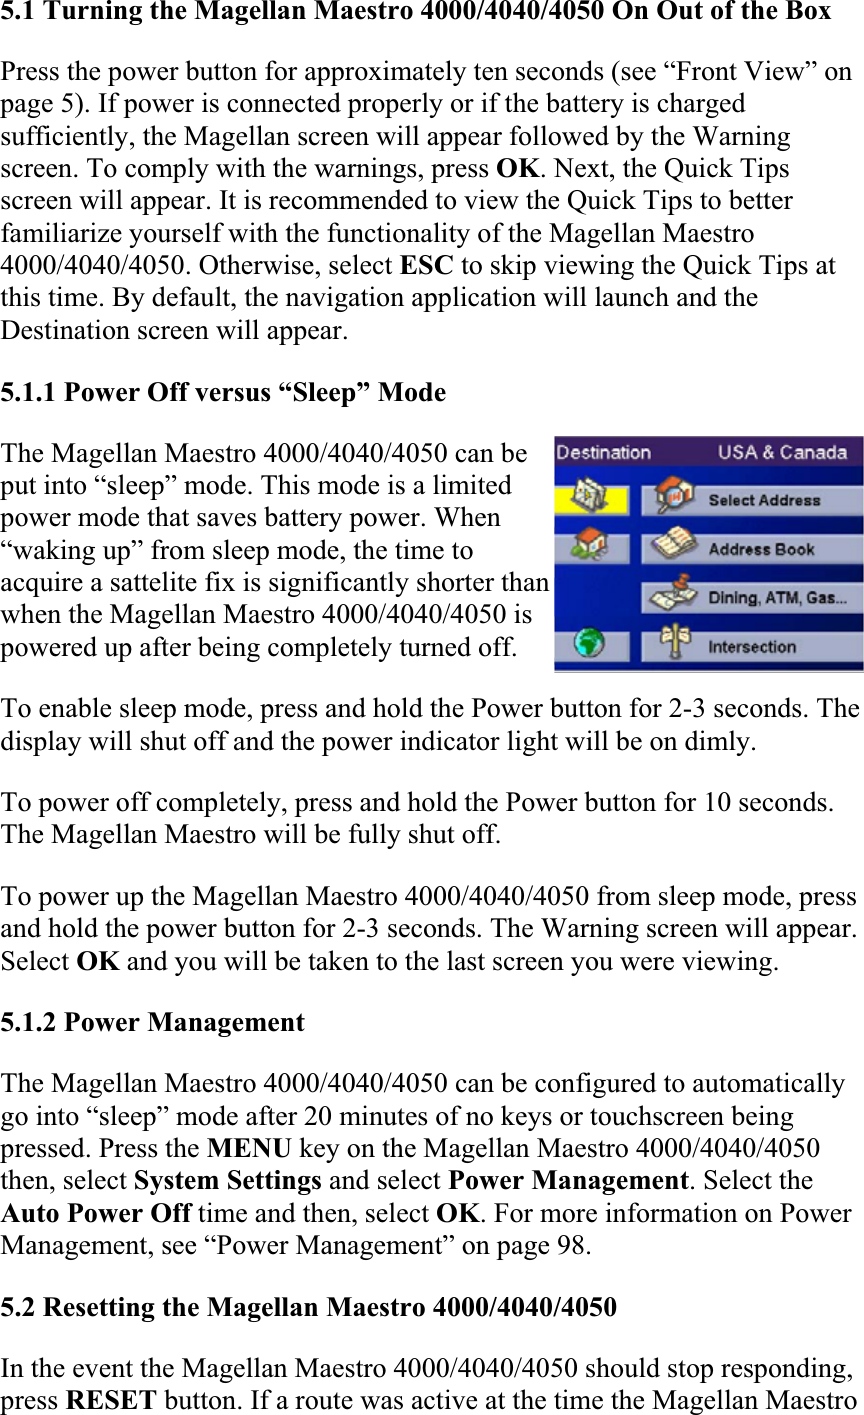 5.1 Turning the Magellan Maestro 4000/4040/4050 On Out of the BoxPress the power button for approximately ten seconds (see “Front View” on page 5). If power is connected properly or if the battery is charged sufficiently, the Magellan screen will appear followed by the Warning screen. To comply with the warnings, press OK. Next, the Quick Tips screen will appear. It is recommended to view the Quick Tips to better familiarize yourself with the functionality of the Magellan Maestro 4000/4040/4050. Otherwise, select ESC to skip viewing the Quick Tips at this time. By default, the navigation application will launch and the Destination screen will appear.  5.1.1 Power Off versus “Sleep” Mode  The Magellan Maestro 4000/4040/4050 can be put into “sleep” mode. This mode is a limited power mode that saves battery power. When “waking up” from sleep mode, the time to acquire a sattelite fix is significantly shorter than when the Magellan Maestro 4000/4040/4050 is powered up after being completely turned off.  To enable sleep mode, press and hold the Power button for 2-3 seconds. The display will shut off and the power indicator light will be on dimly.  To power off completely, press and hold the Power button for 10 seconds. The Magellan Maestro will be fully shut off.  To power up the Magellan Maestro 4000/4040/4050 from sleep mode, press and hold the power button for 2-3 seconds. The Warning screen will appear. Select OK and you will be taken to the last screen you were viewing.5.1.2 Power Management  The Magellan Maestro 4000/4040/4050 can be configured to automatically go into “sleep” mode after 20 minutes of no keys or touchscreen being pressed. Press the MENU key on the Magellan Maestro 4000/4040/4050 then, select System Settings and select Power Management. Select the Auto Power Off time and then, select OK. For more information on Power Management, see “Power Management” on page 98.  5.2 Resetting the Magellan Maestro 4000/4040/4050In the event the Magellan Maestro 4000/4040/4050 should stop responding, press RESET button. If a route was active at the time the Magellan Maestro 